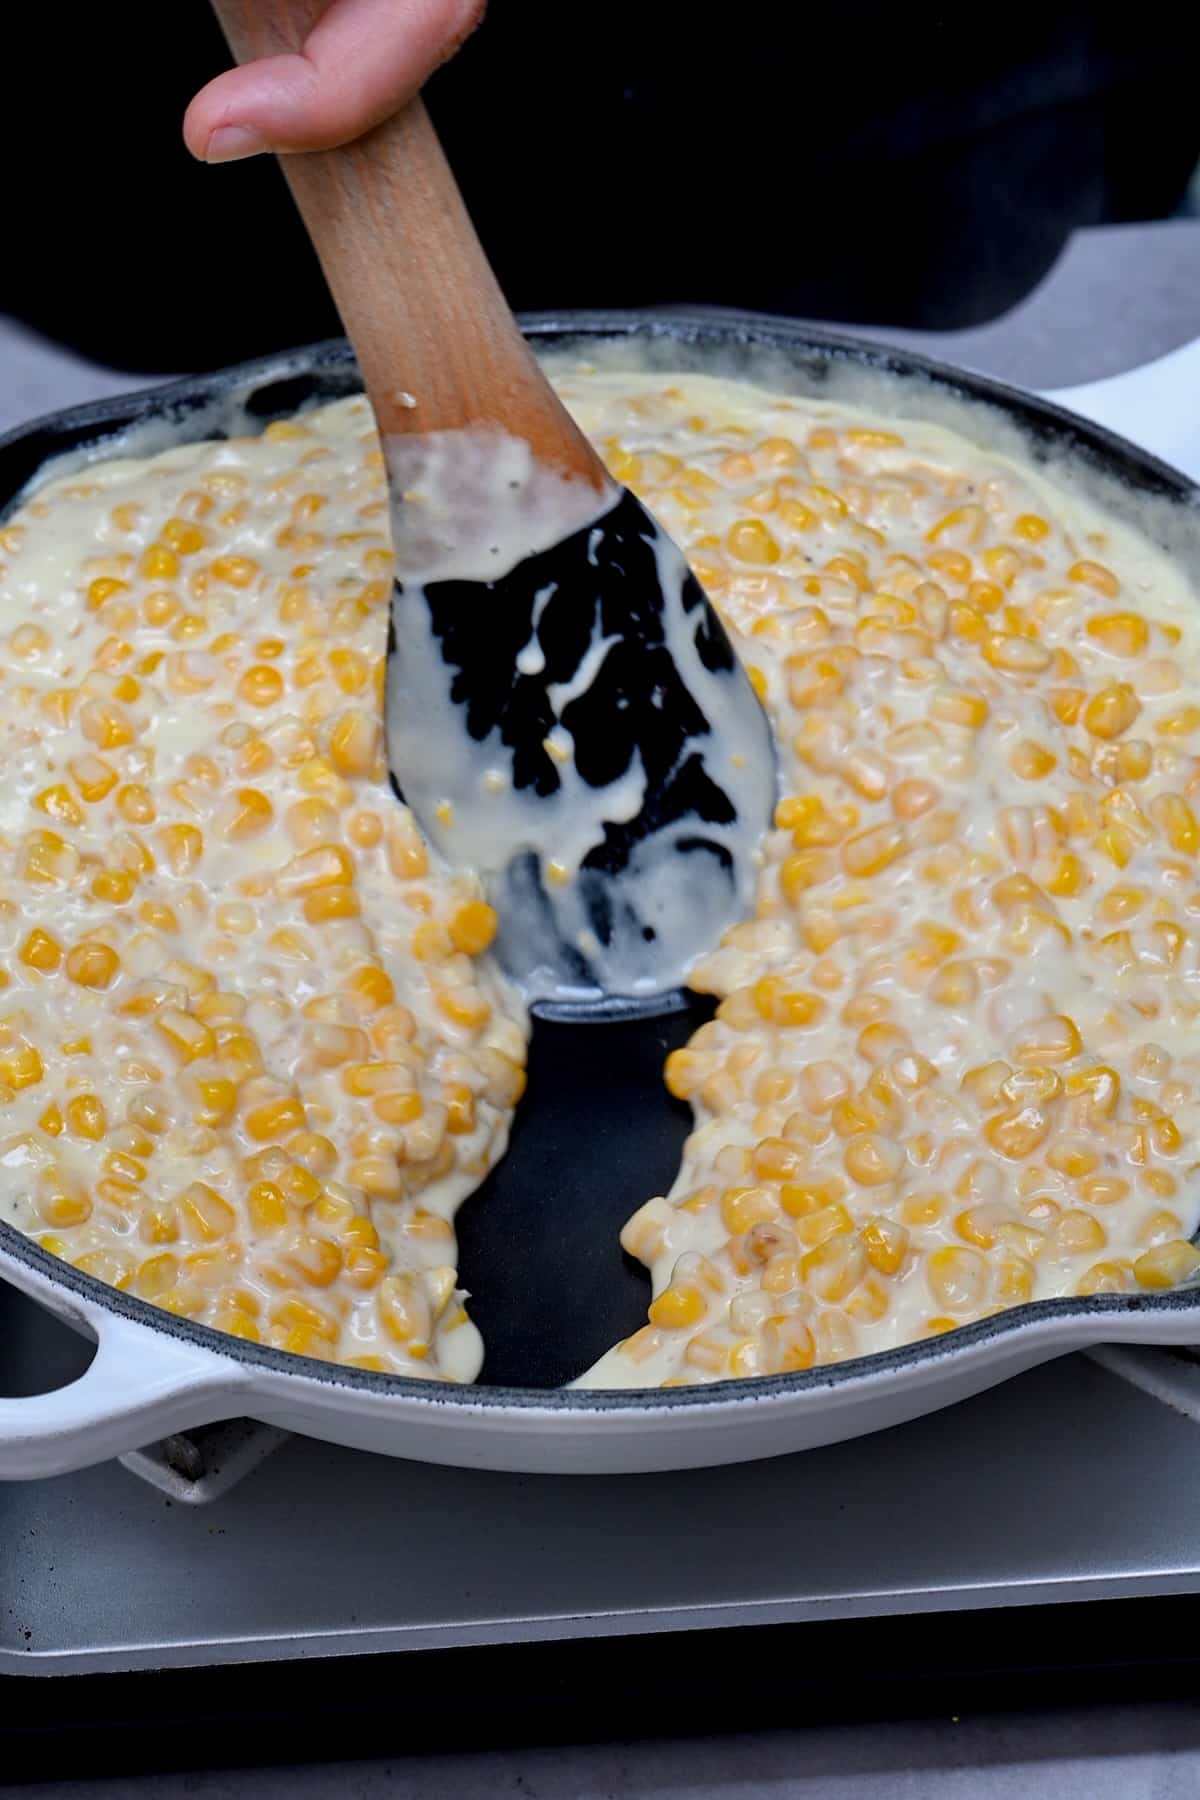 Cooking creamed corn on a skillet